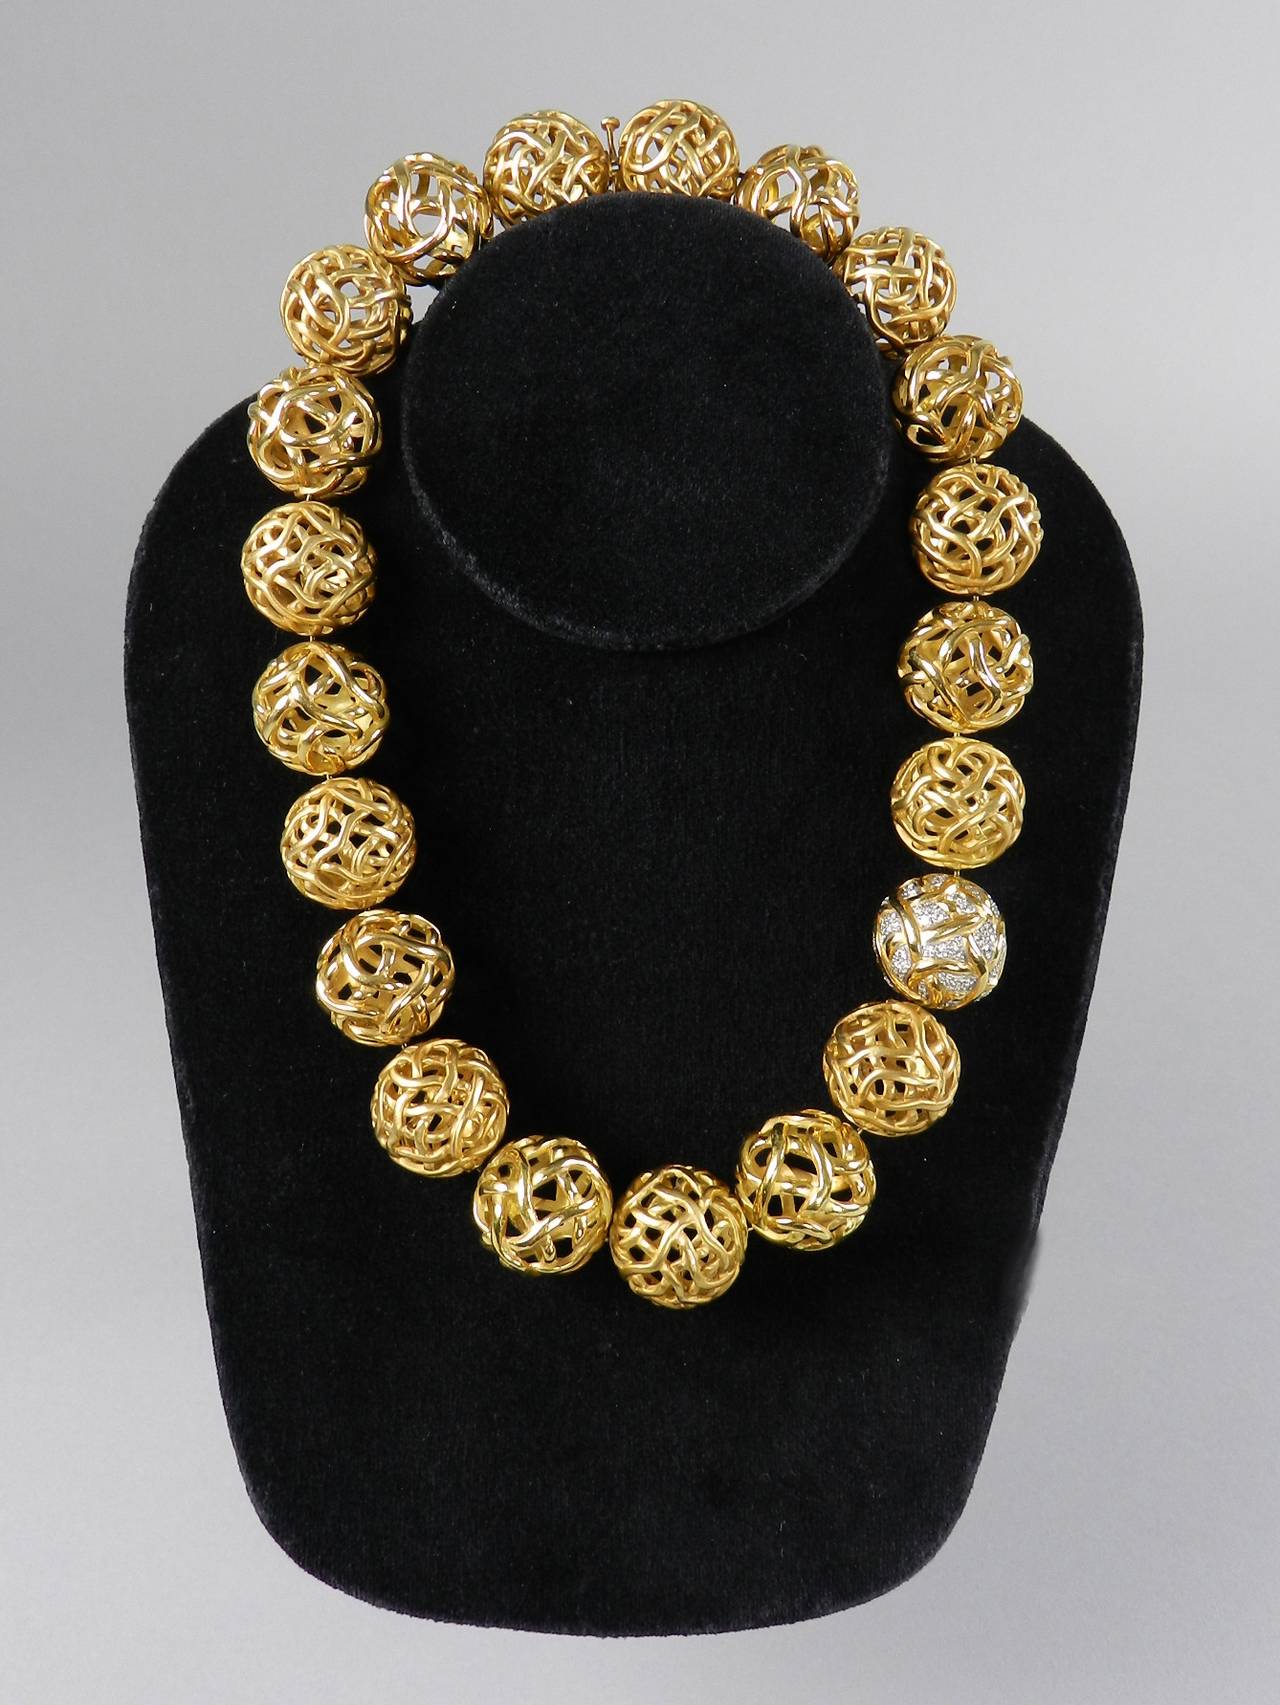 Angela Cummings 18k yellow gold and diamond pave ball necklace. She designed jewelry at Tiffany and Co. from 1969 to 1984. The necklace has 20 alternating open-work balls in matte brushed gold and shiny gold finish, and 1 diamond pave ball. It is